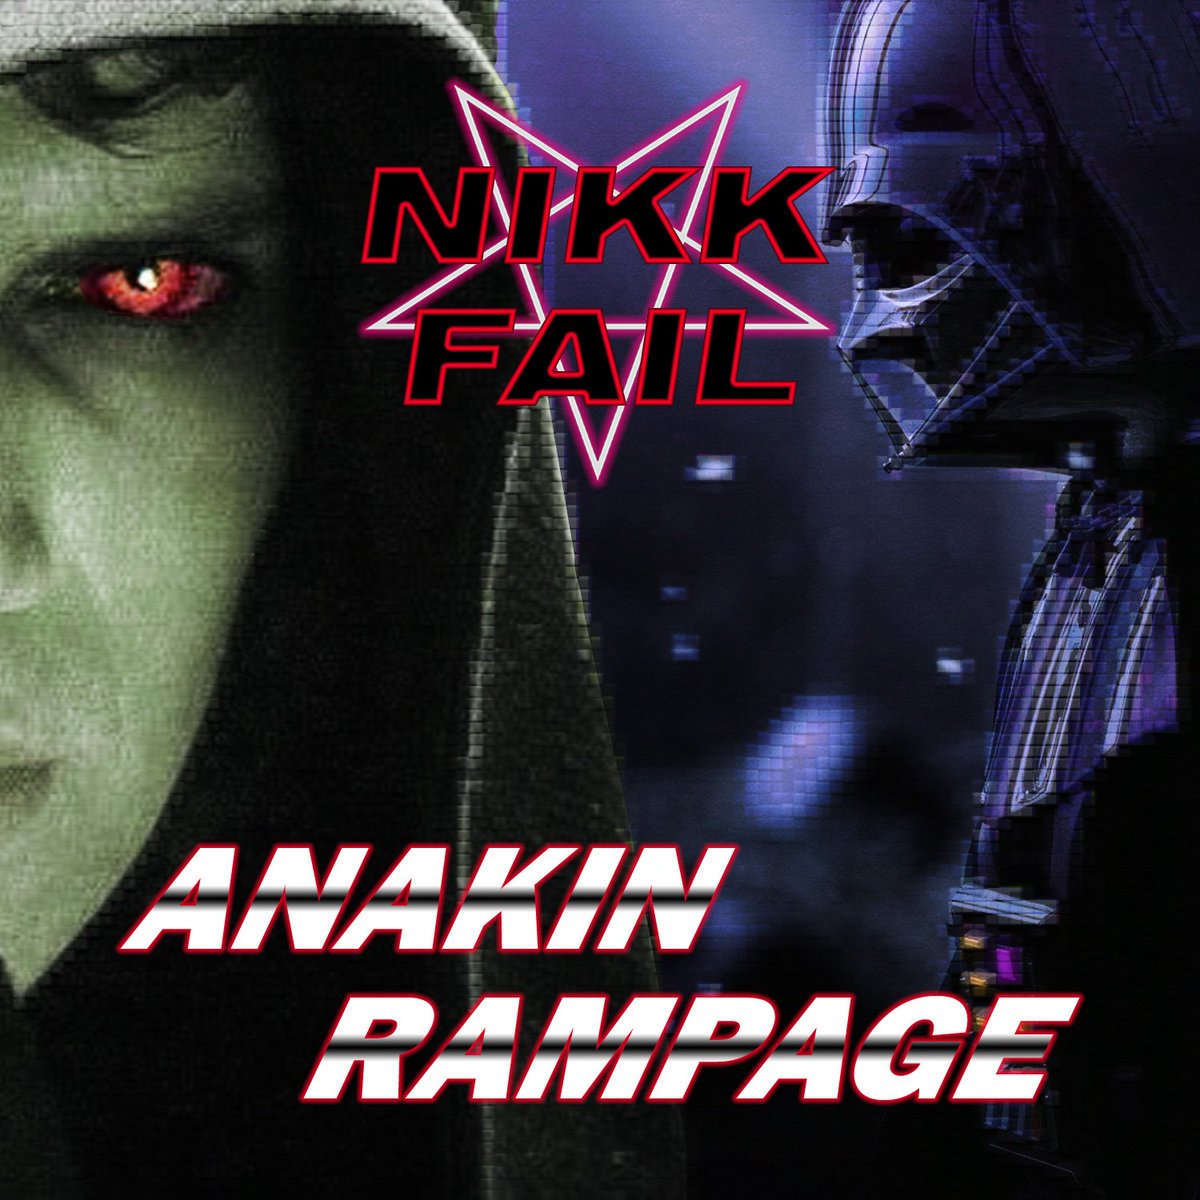 Anakin Rampage - (The Ballad of Vader) 4th track of my upcoming 'End of The Line' set to be released on June 8th this year

Pre oder available via #distrokid 

#synthwave #darksynth #spacewave #anakinskywalker #anakinrampage #nikkfail #endoftheline #june8